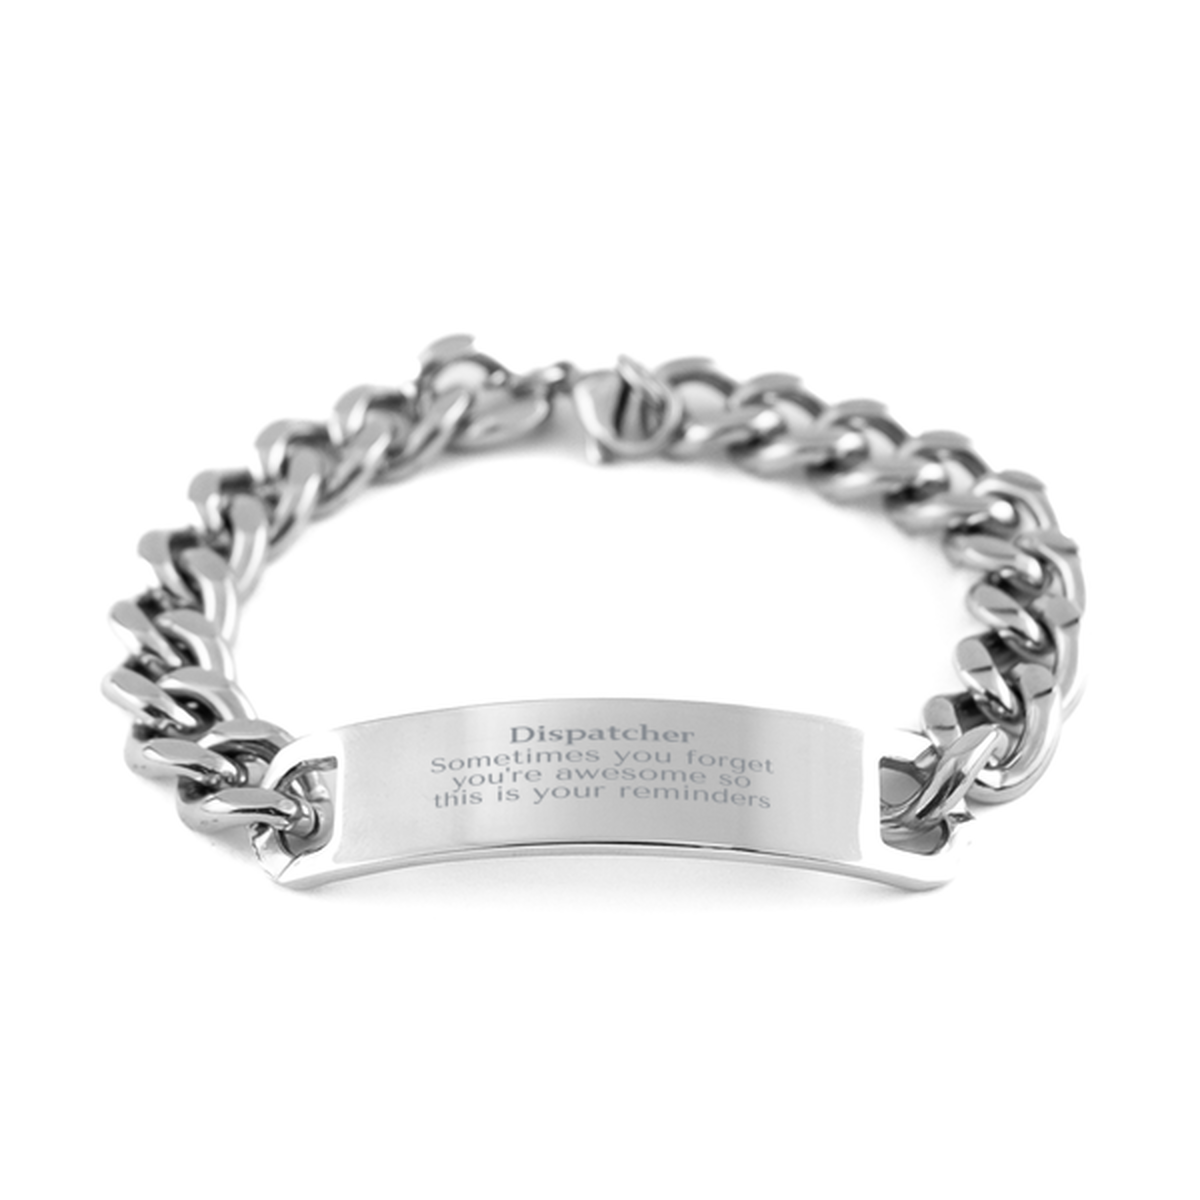 Sentimental Dispatcher Cuban Chain Stainless Steel Bracelet, Dispatcher Sometimes you forget you're awesome so this is your reminders, Graduation Christmas Birthday Gifts for Dispatcher, Men, Women, Coworkers